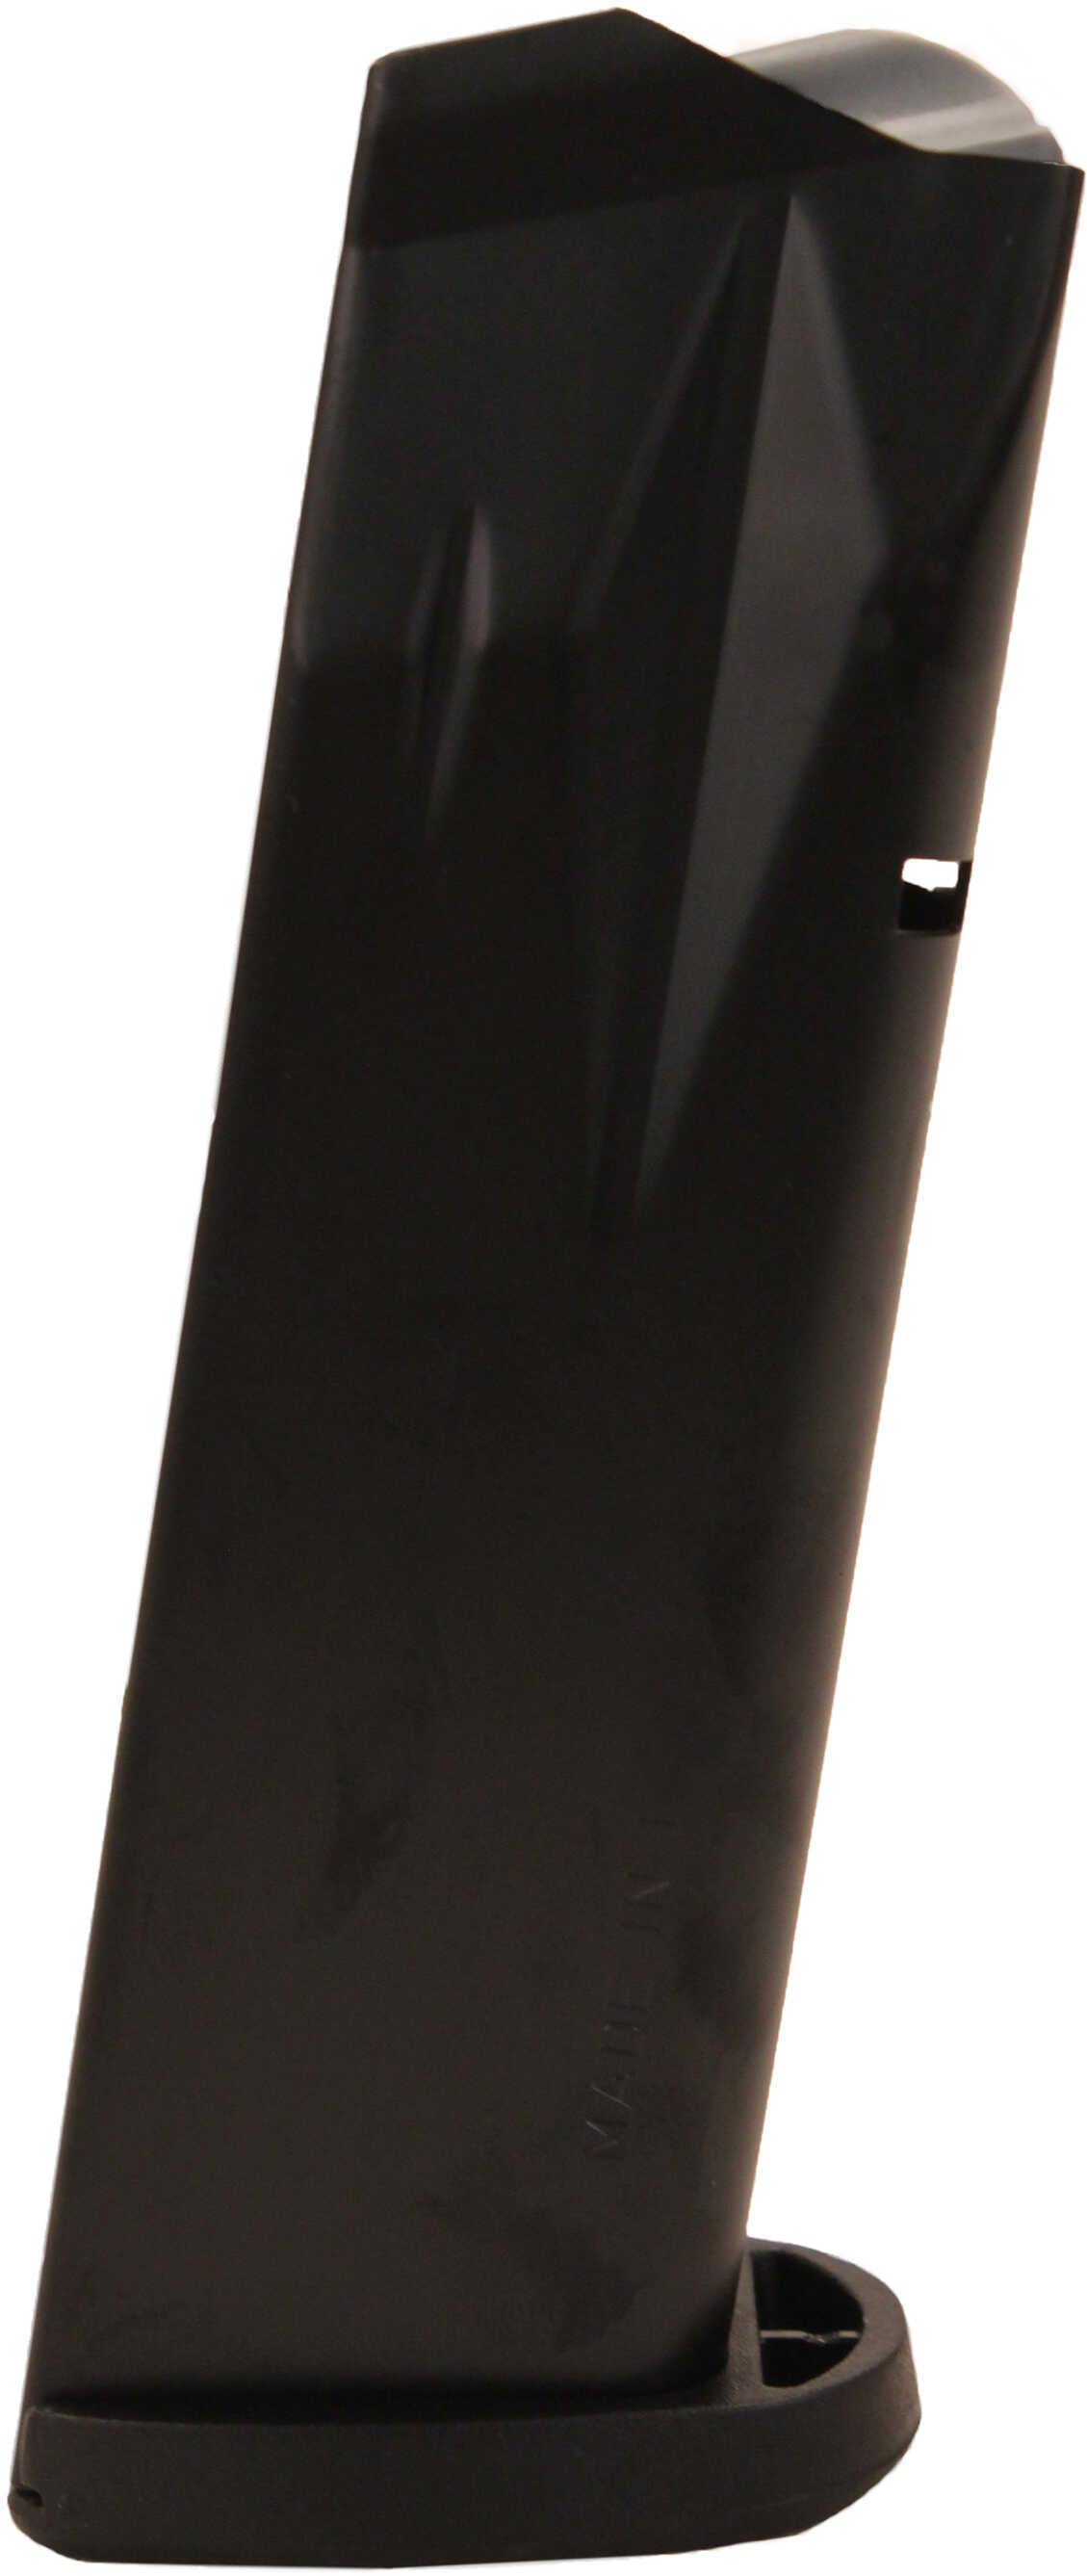 Walther Arms Magazine PPQ M2 45ACP 12Rd 2810883